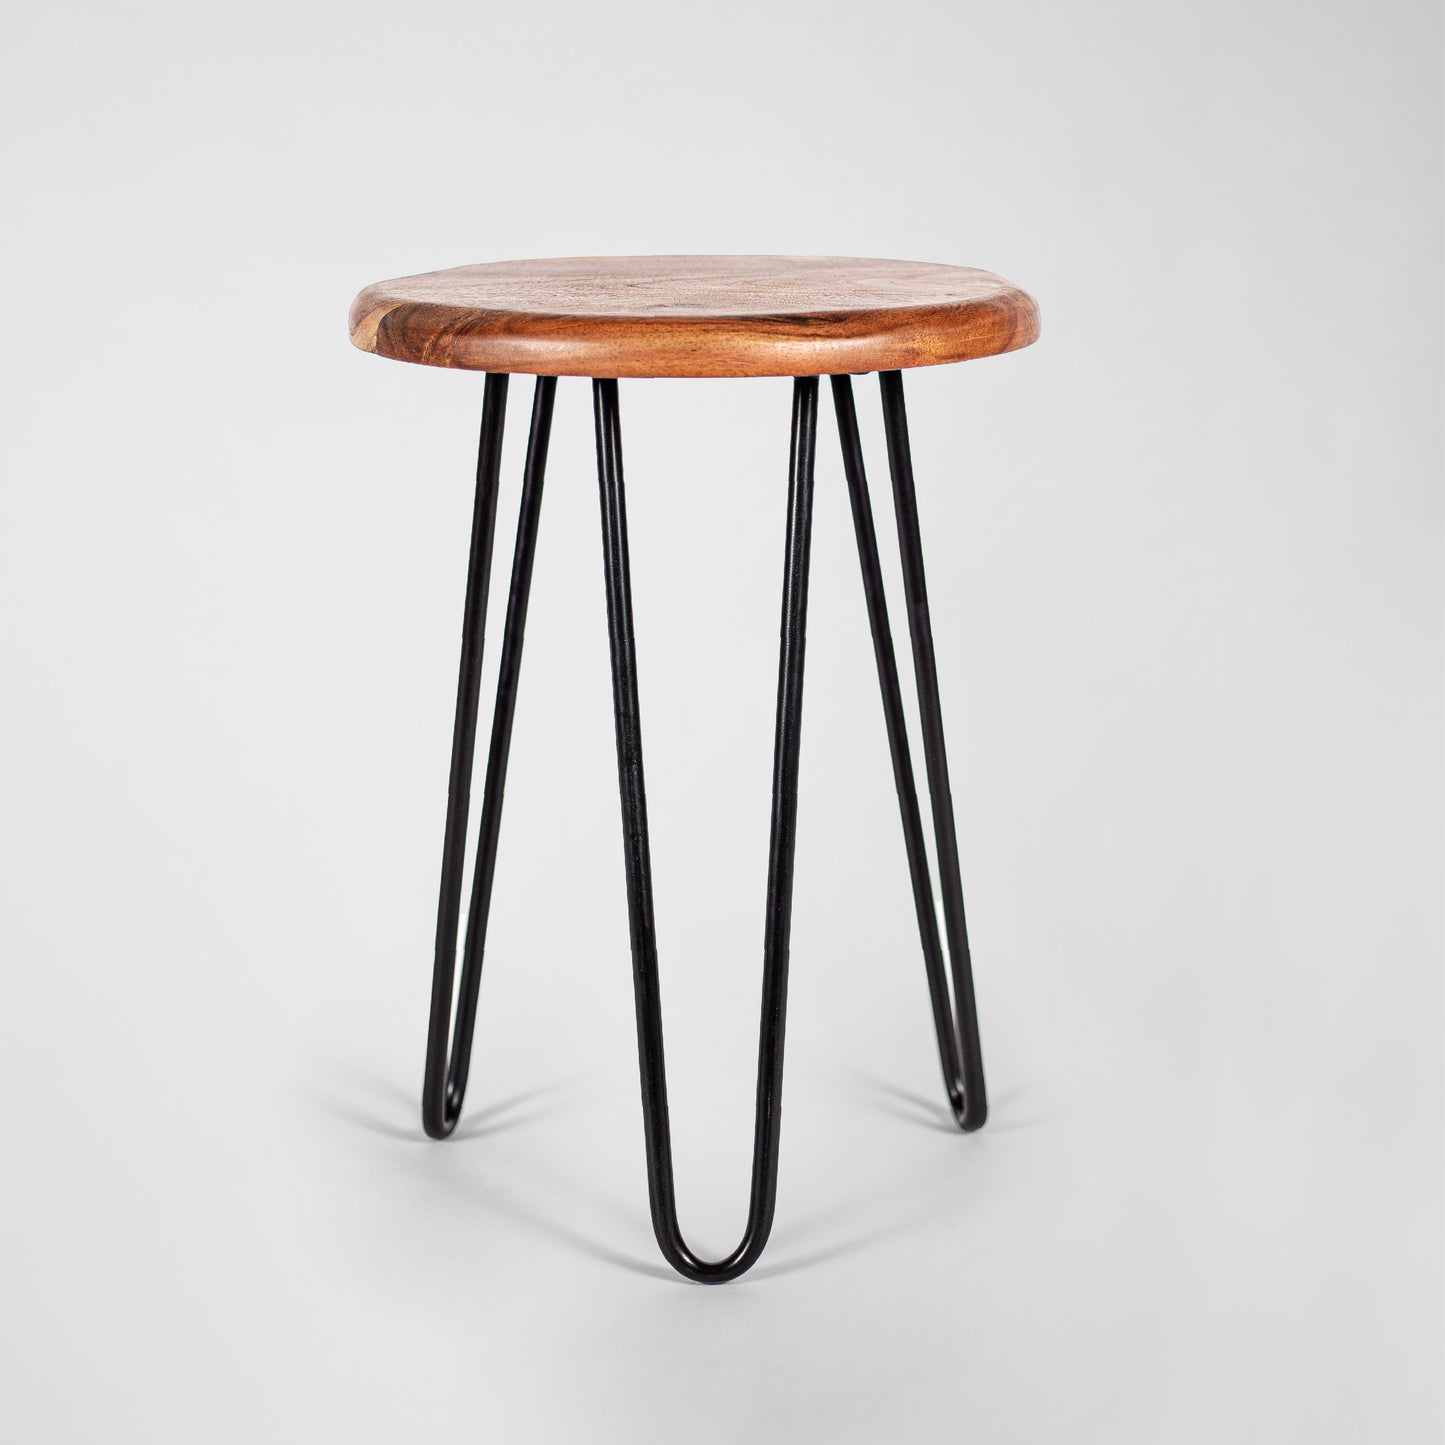 HairPin 103 – industrial design stool made of metal with wooden seat in black or copper